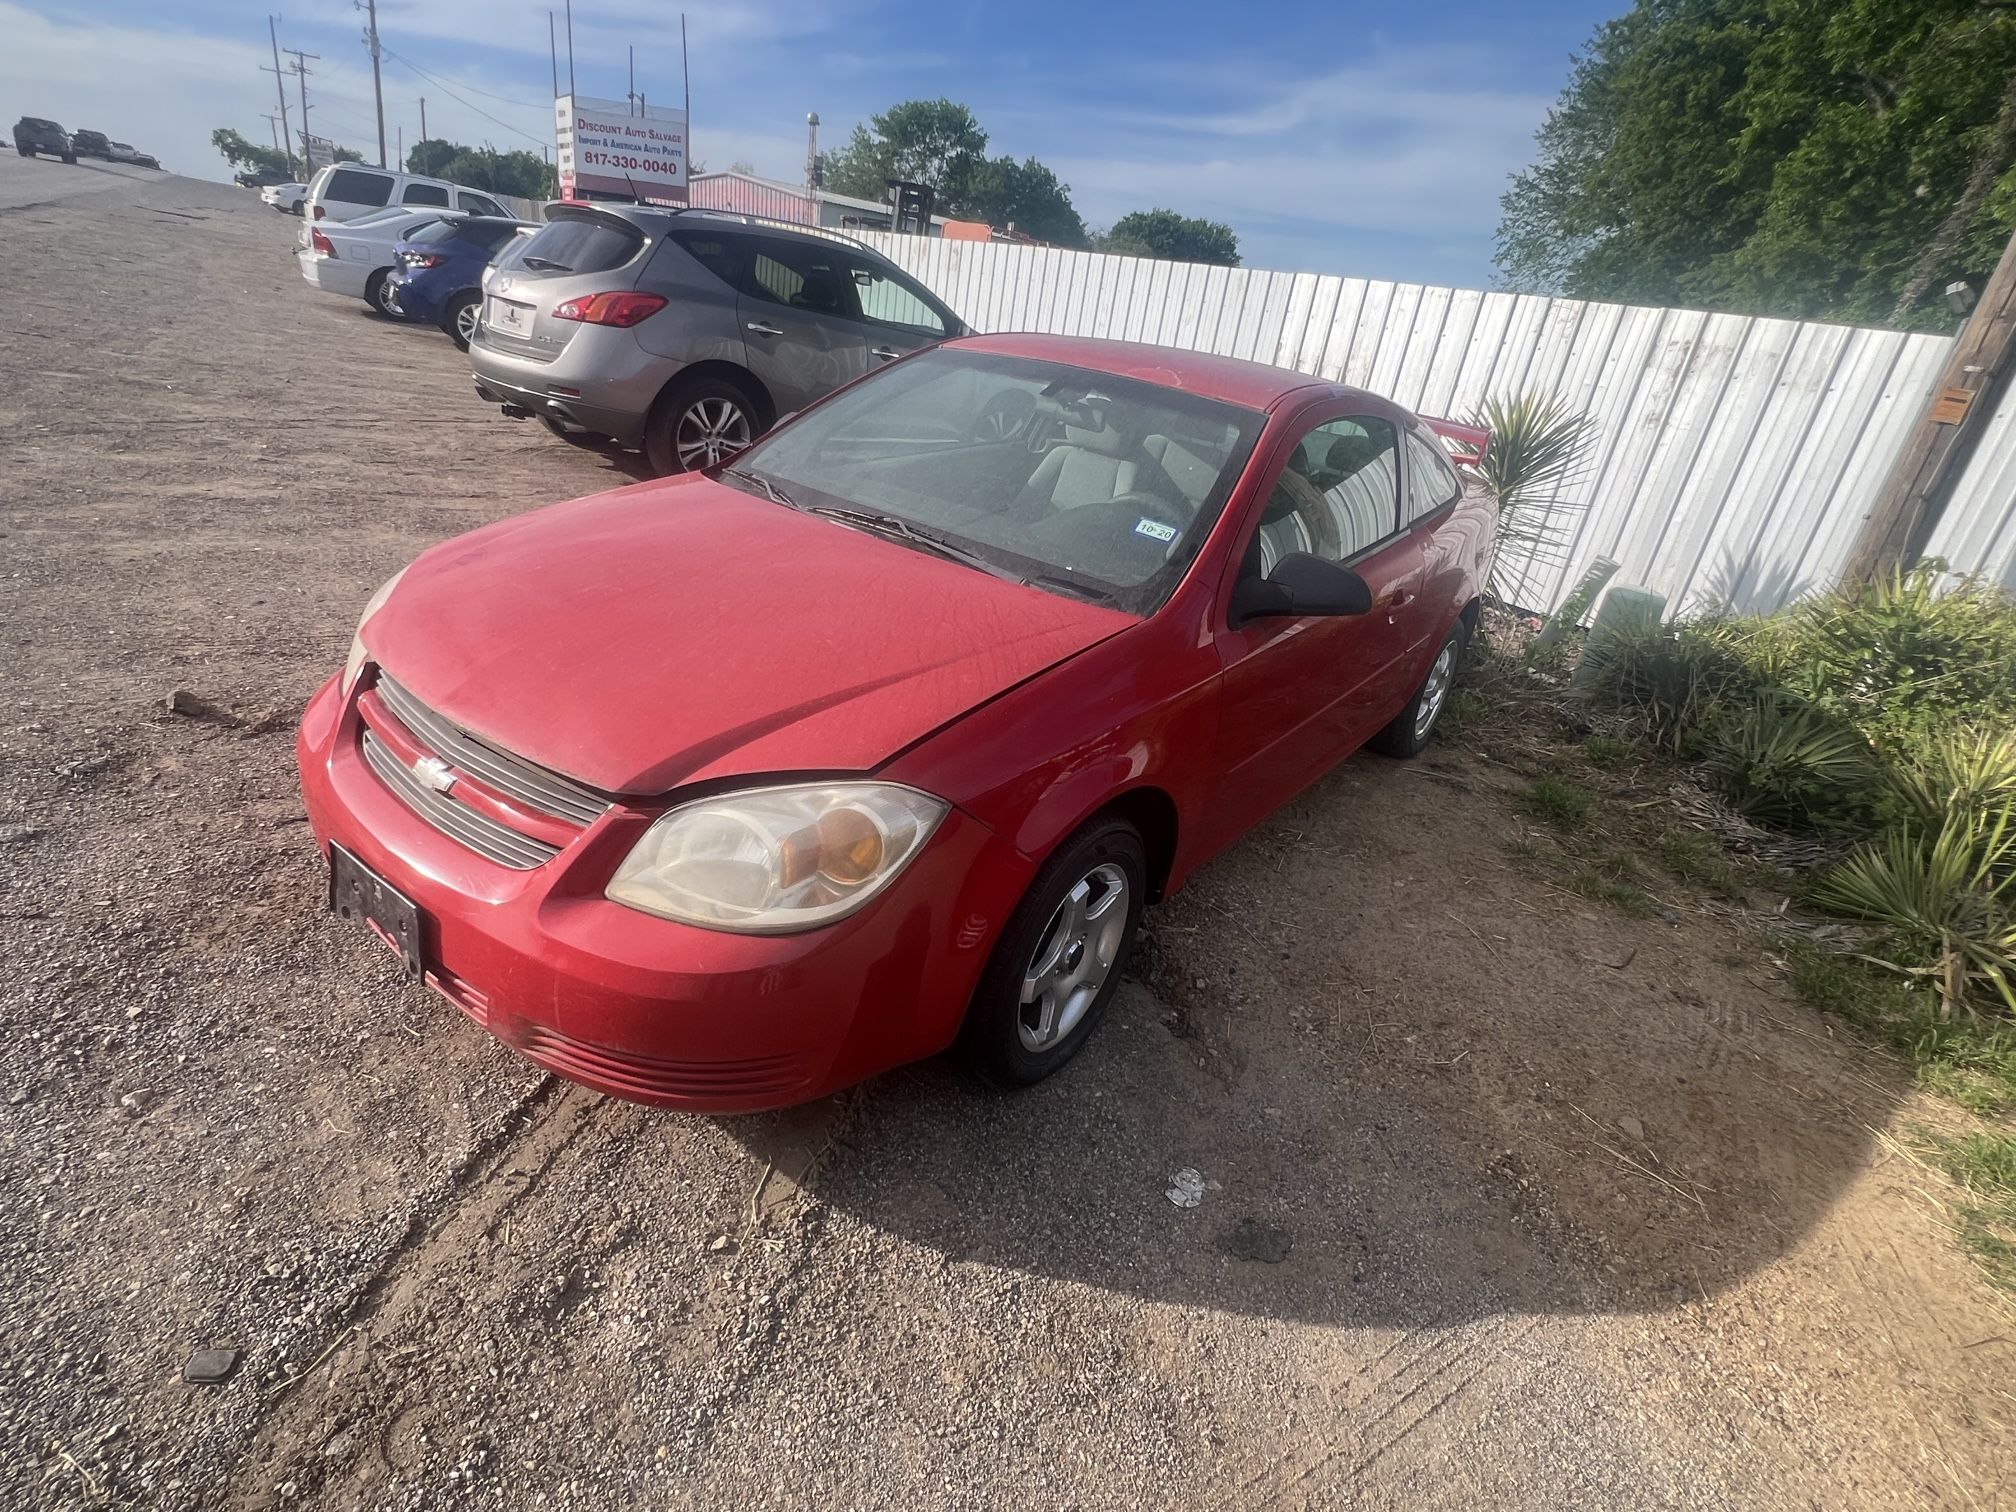 2005 Chevy Cobalt - Parts Only #DB5